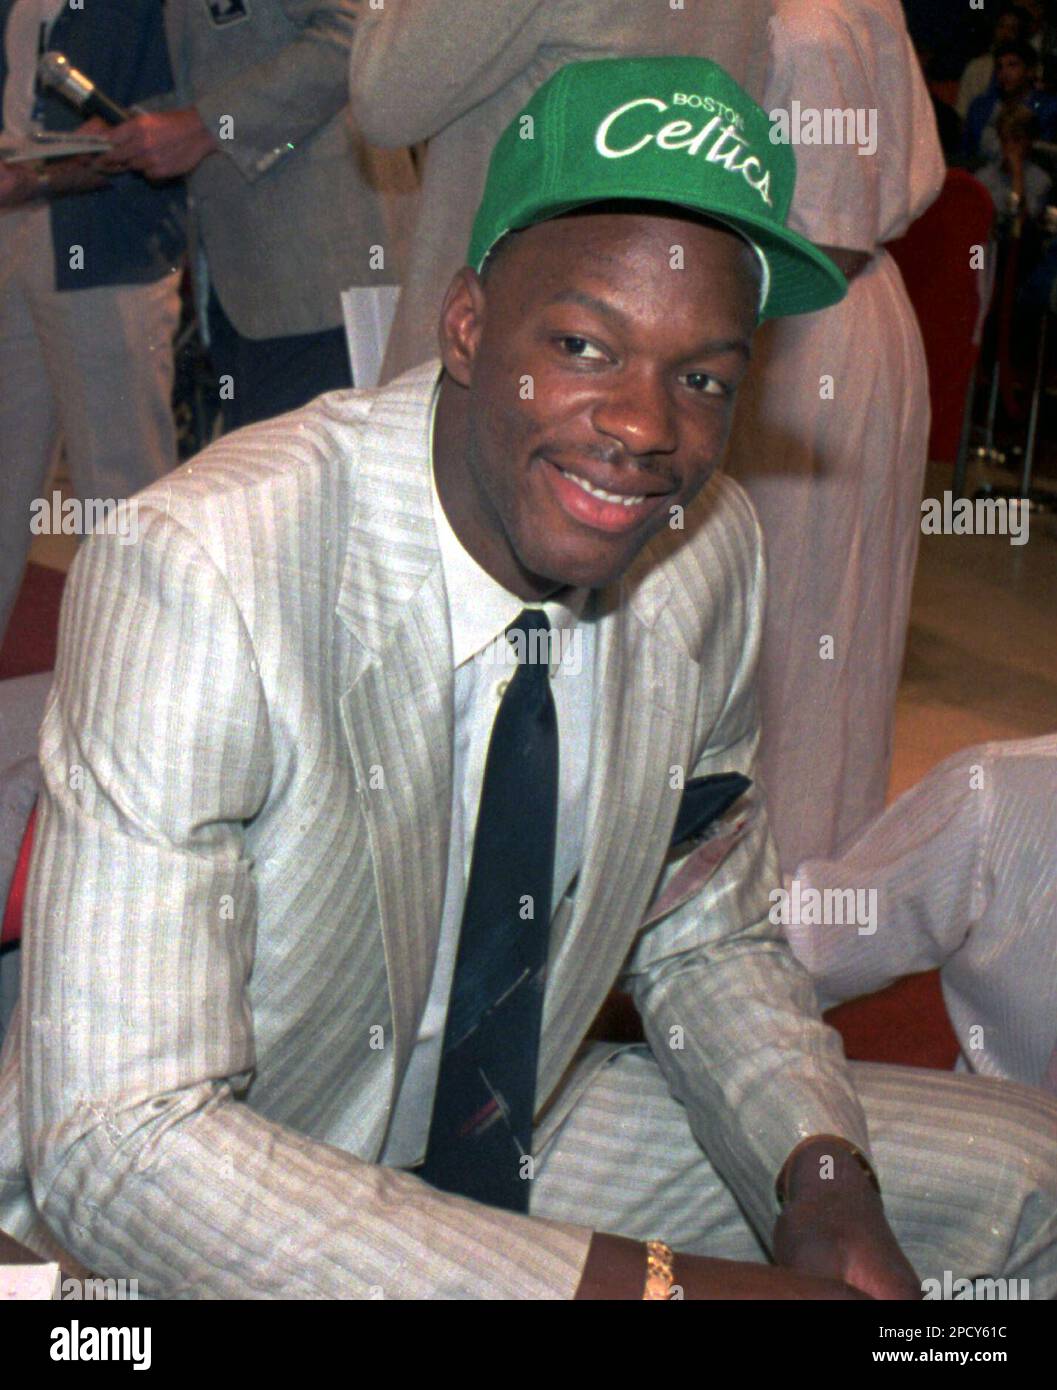 ADVANCE FOR WEEKEND EDITIONS JUNE 17-19 ** FILE ** Len Bias wears a Boston  Celtics hat after being selected as the No. 2 pick in the NBA draft in New  York